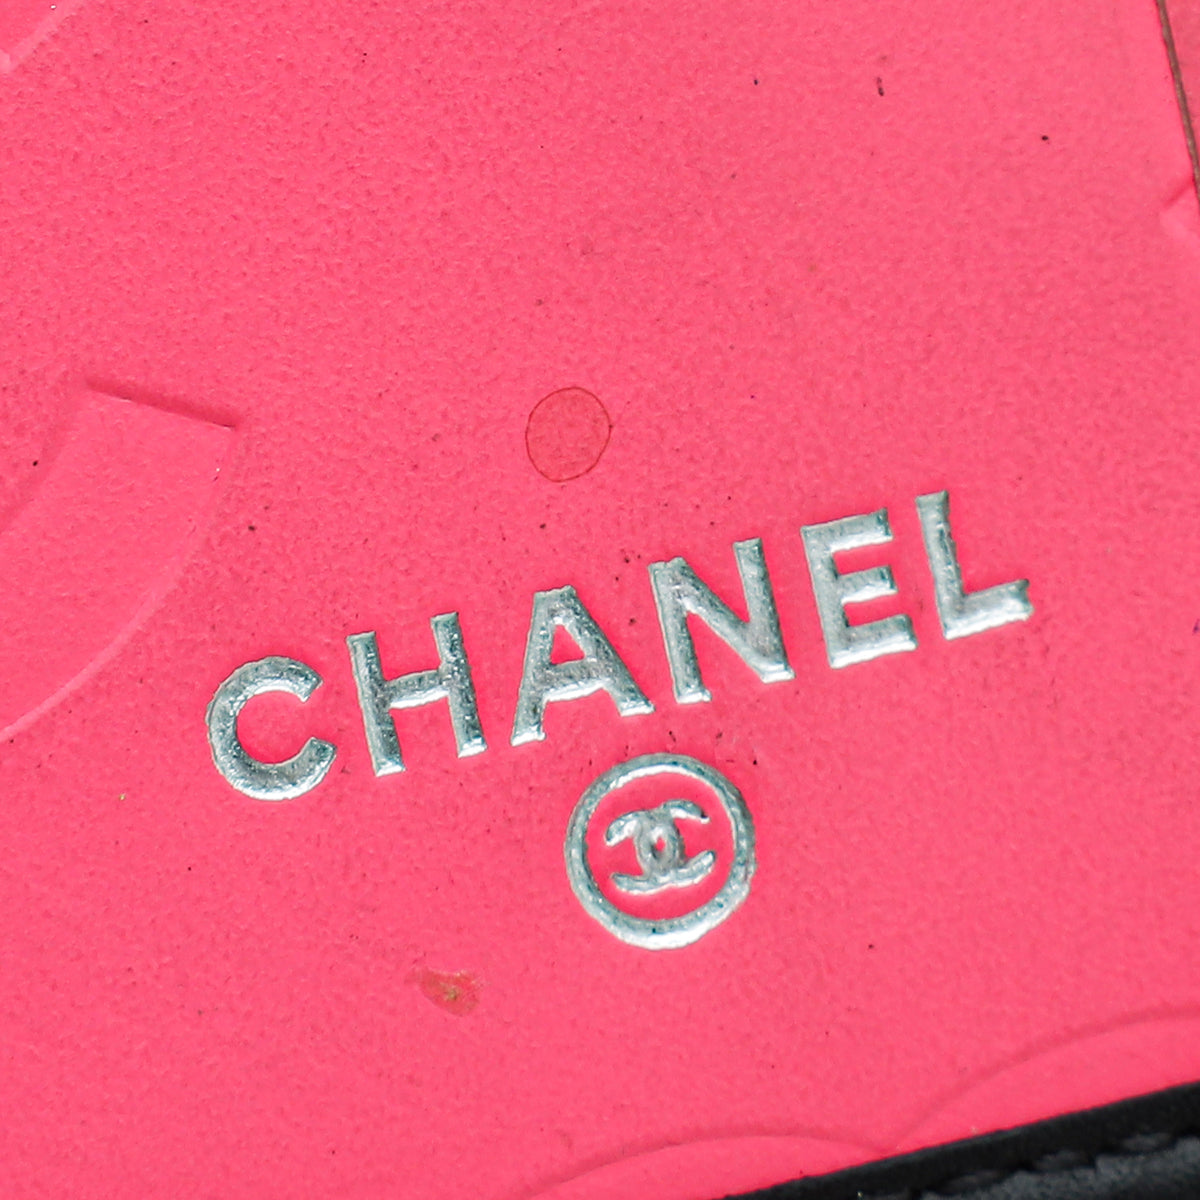 Chanel Bicolor CC Cambon French Wallet